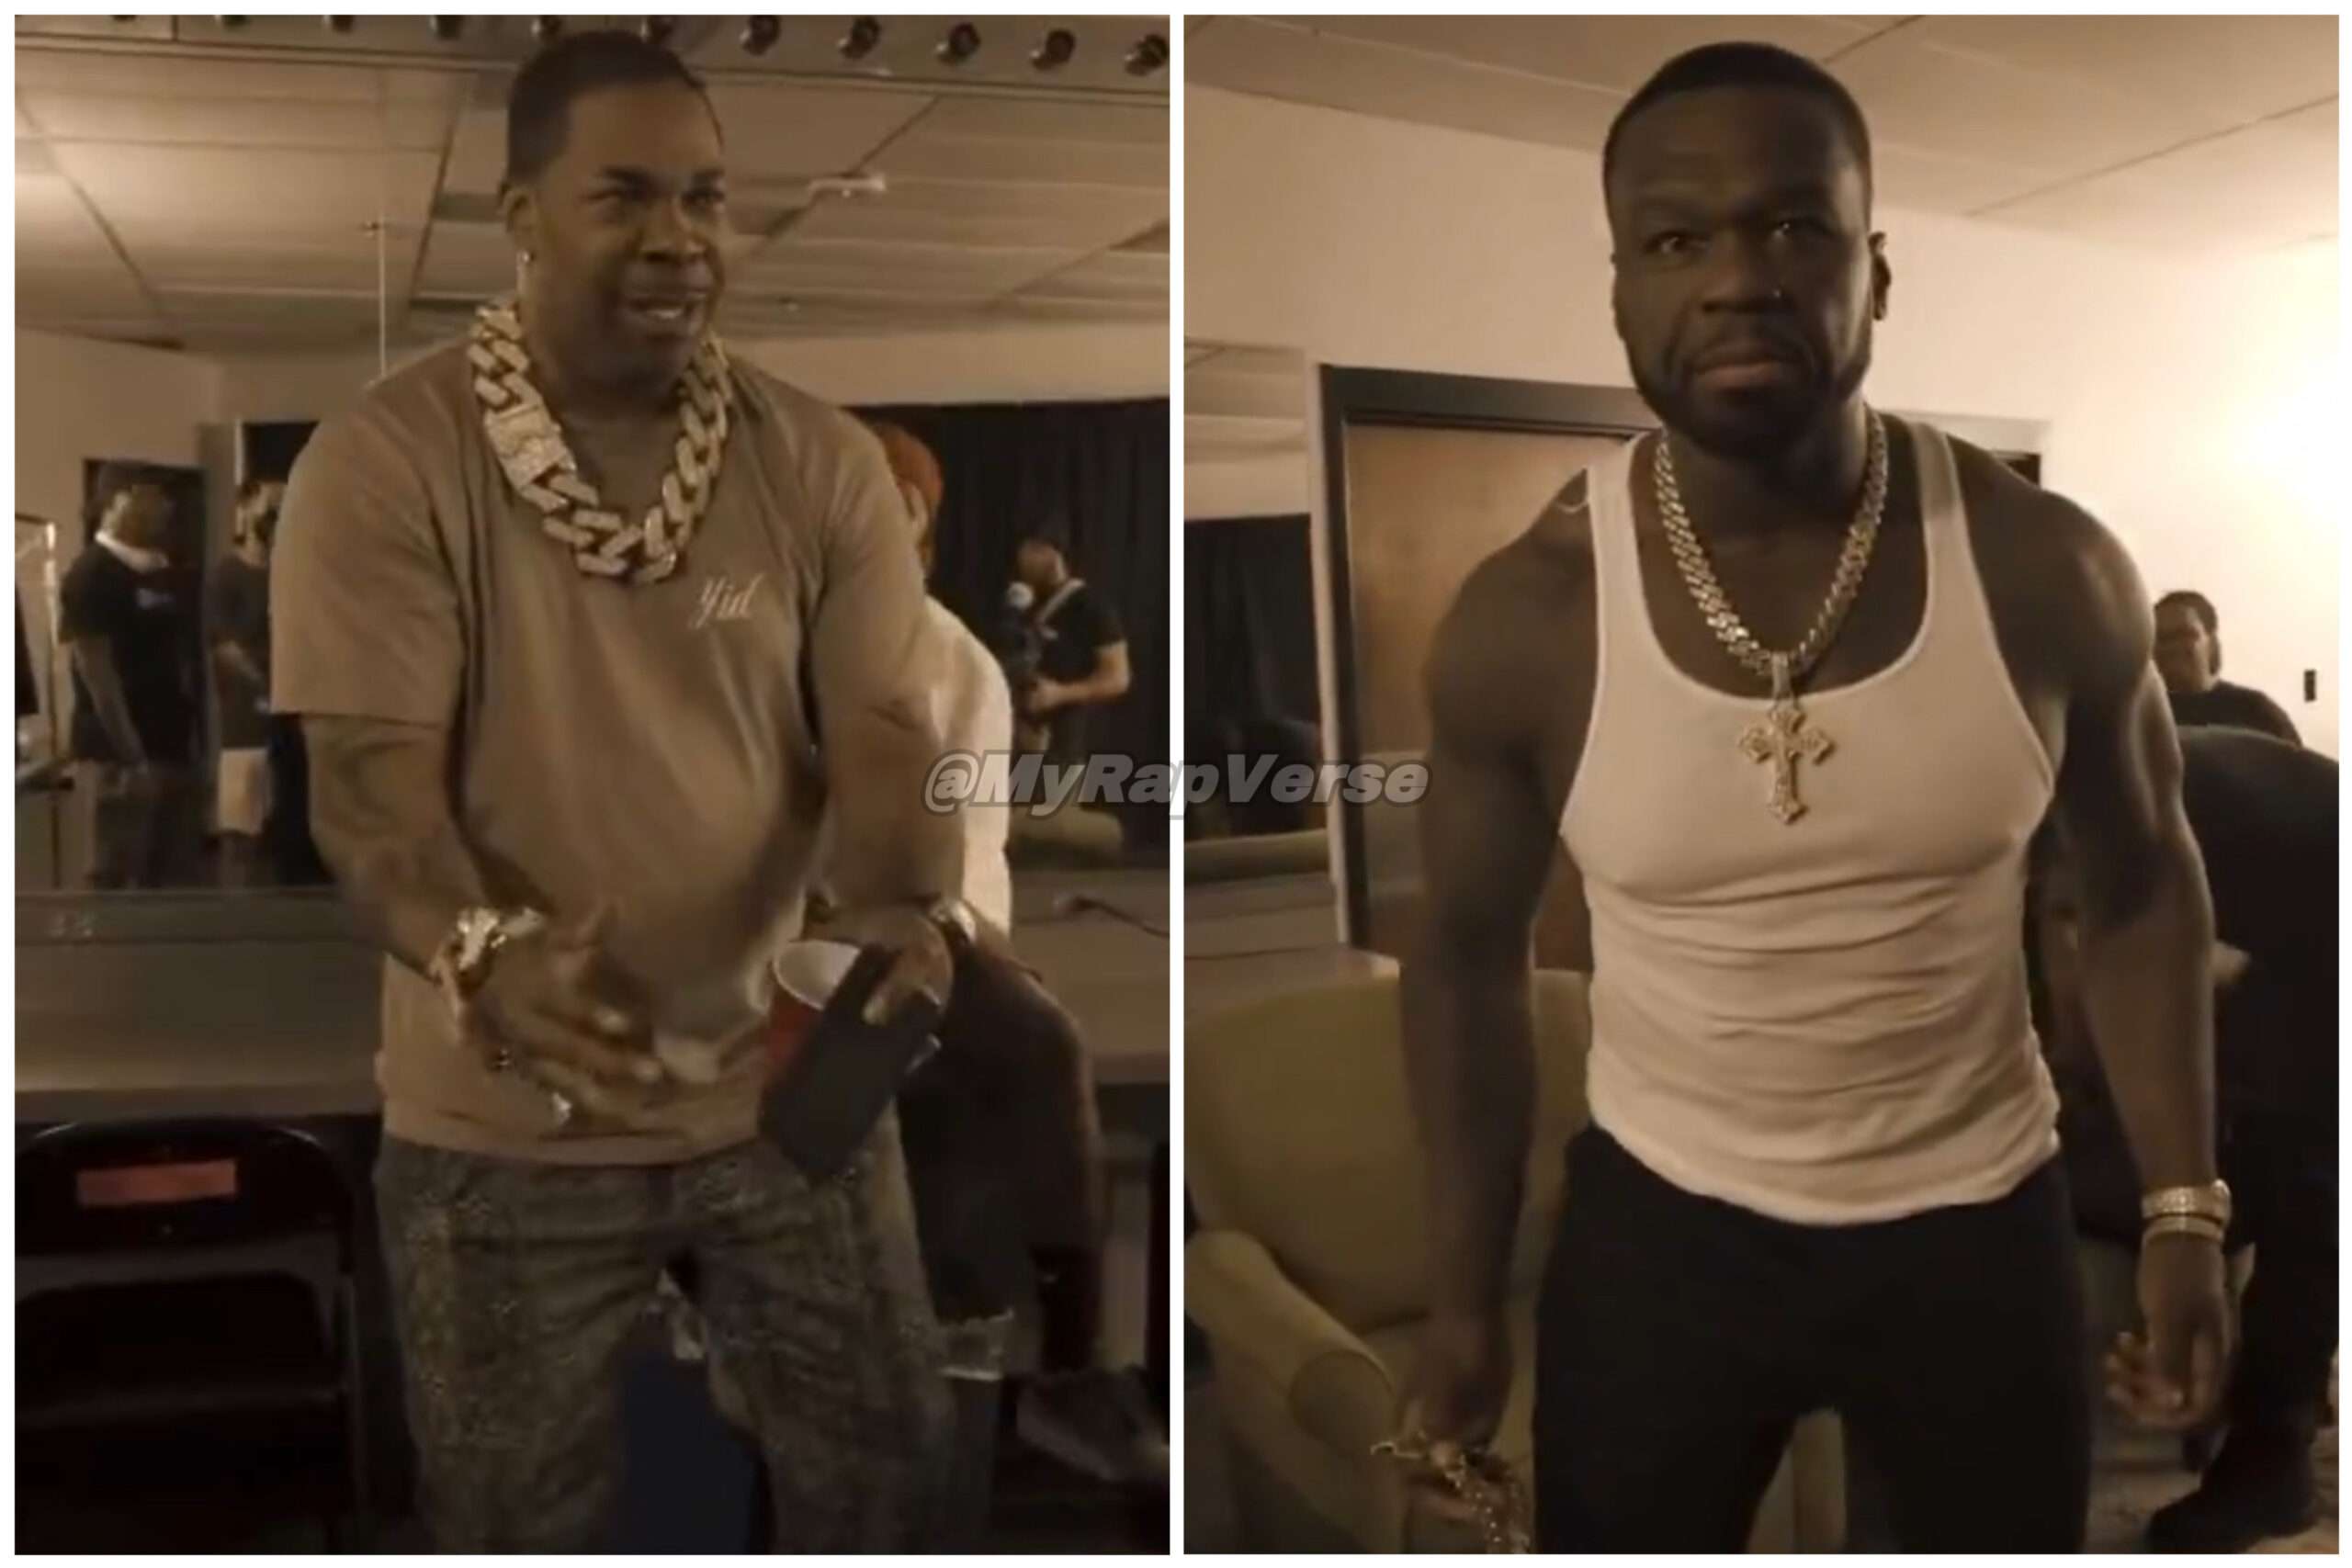 50 Cent Trolls Busta Rhymes Over His Huge Chain: “The Chain Too Big ...